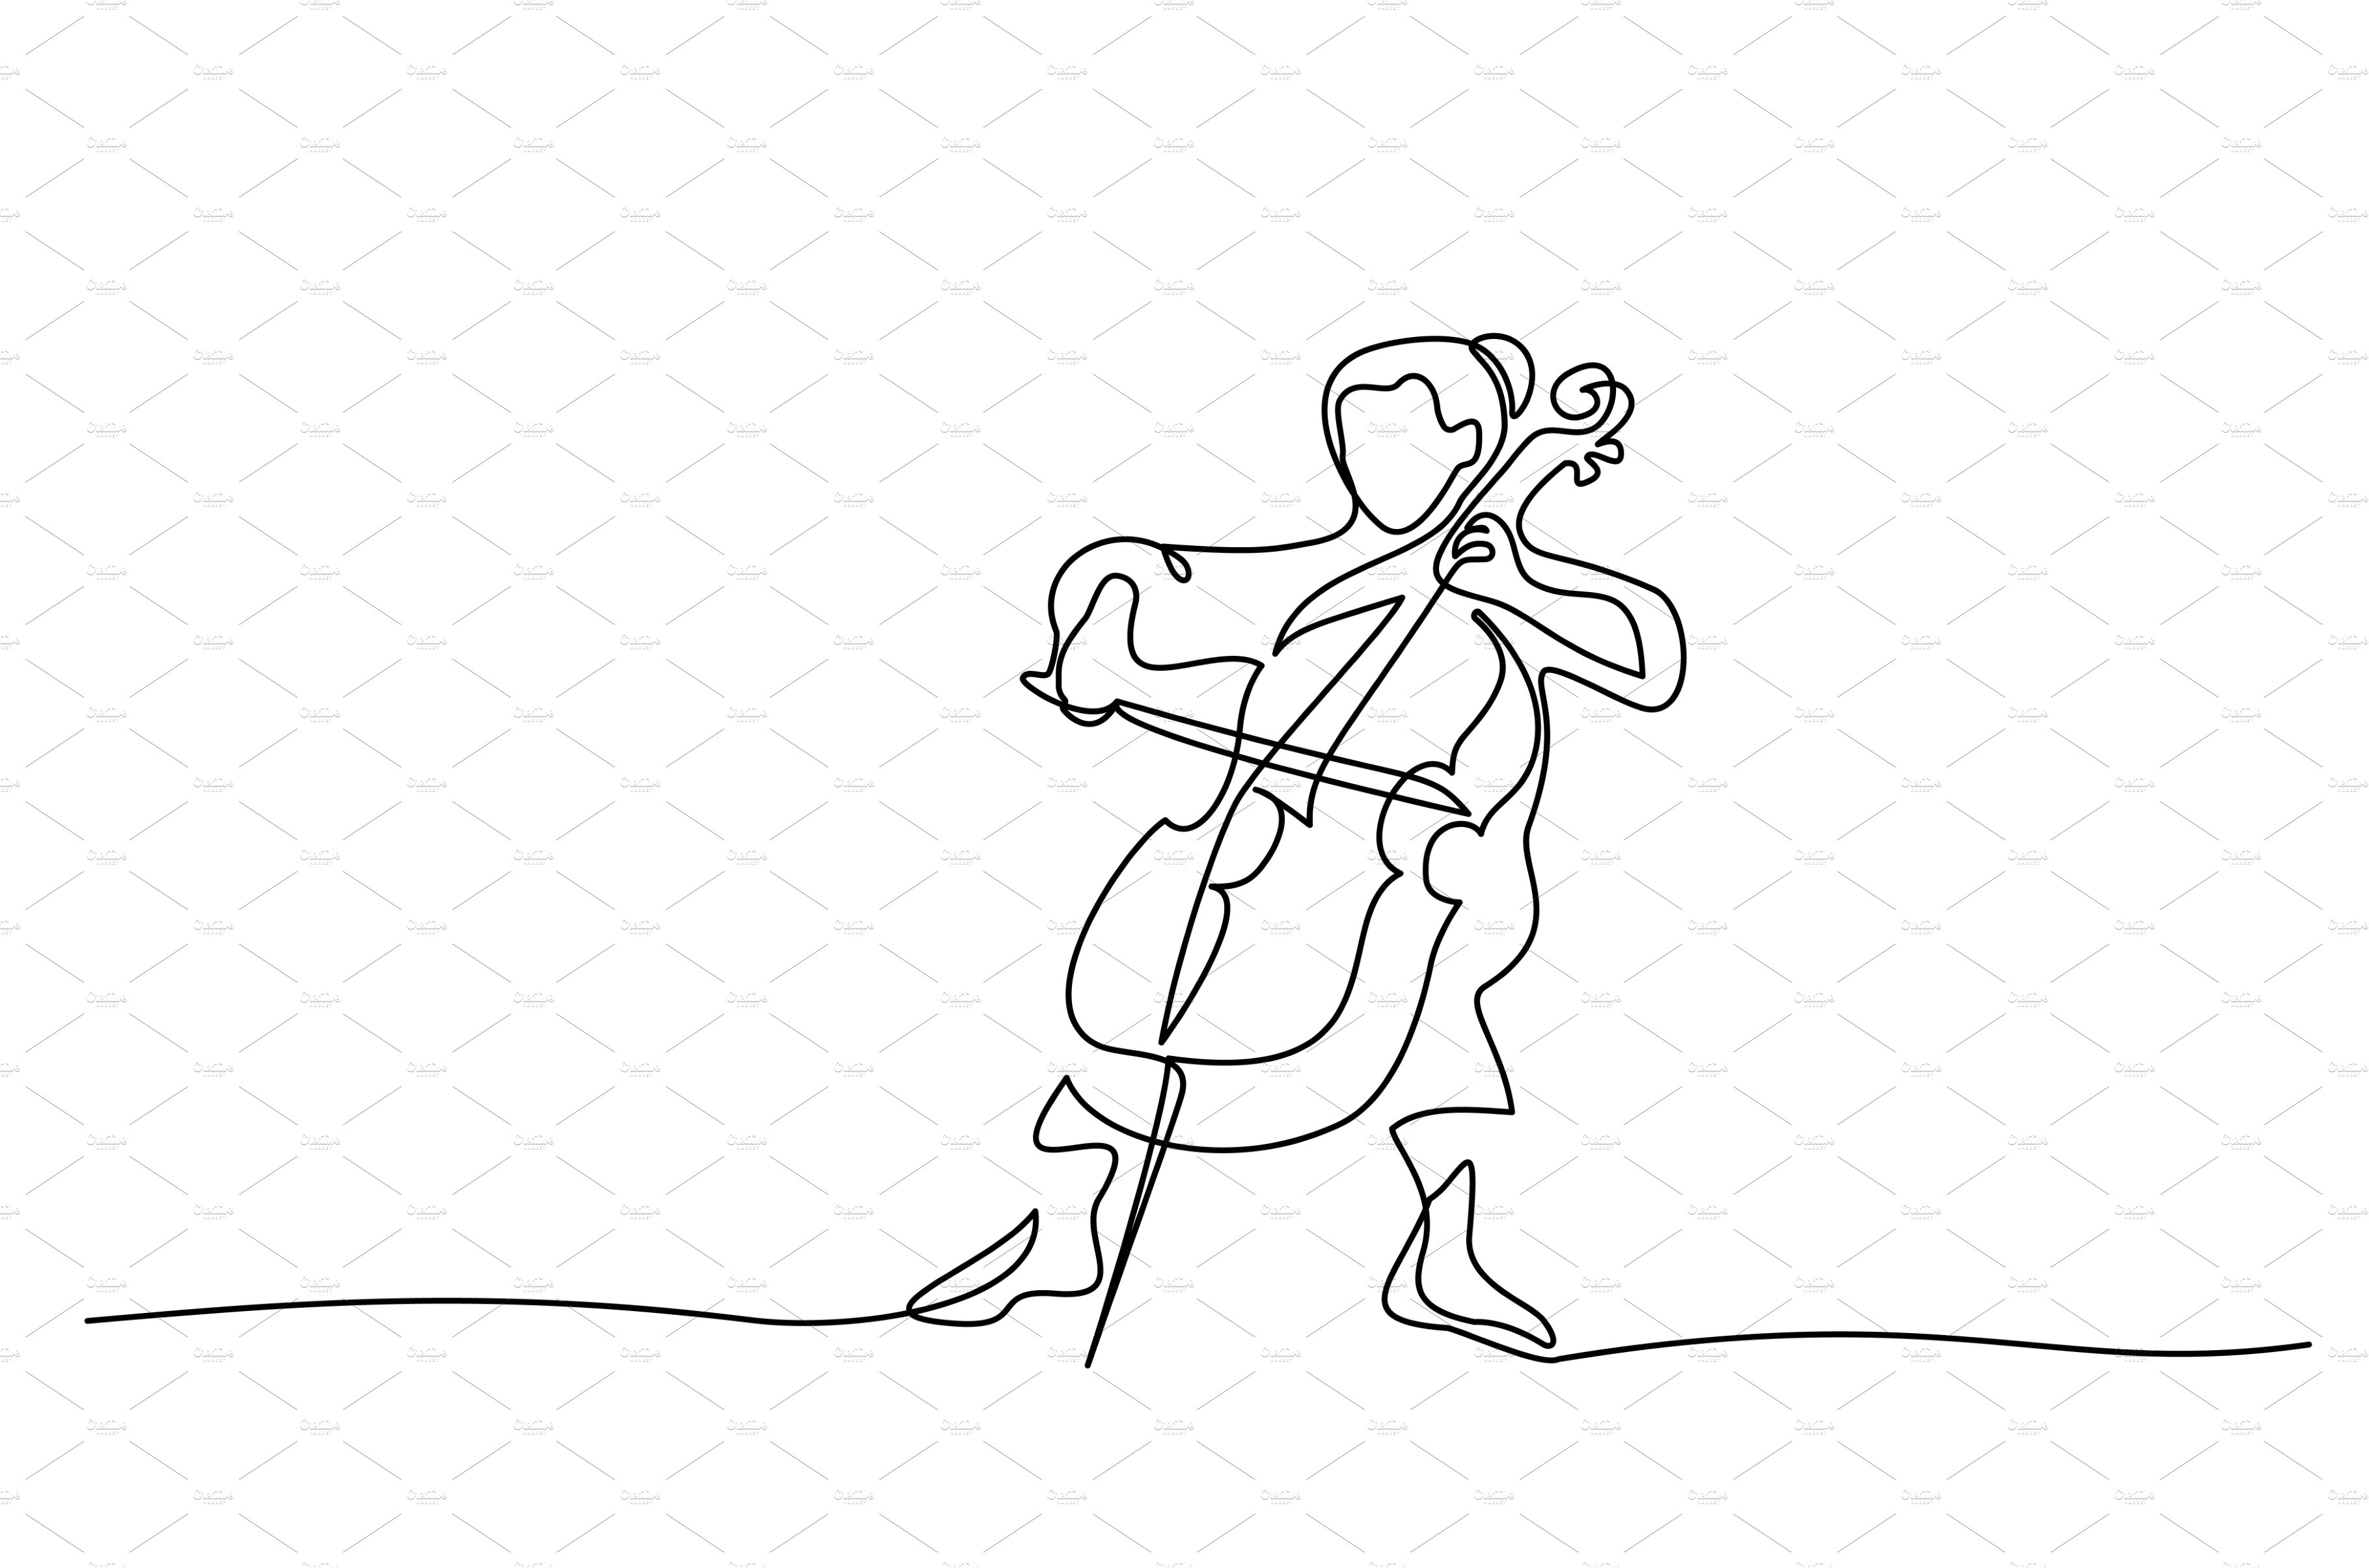 Musician playing cello. Continuous cover image.